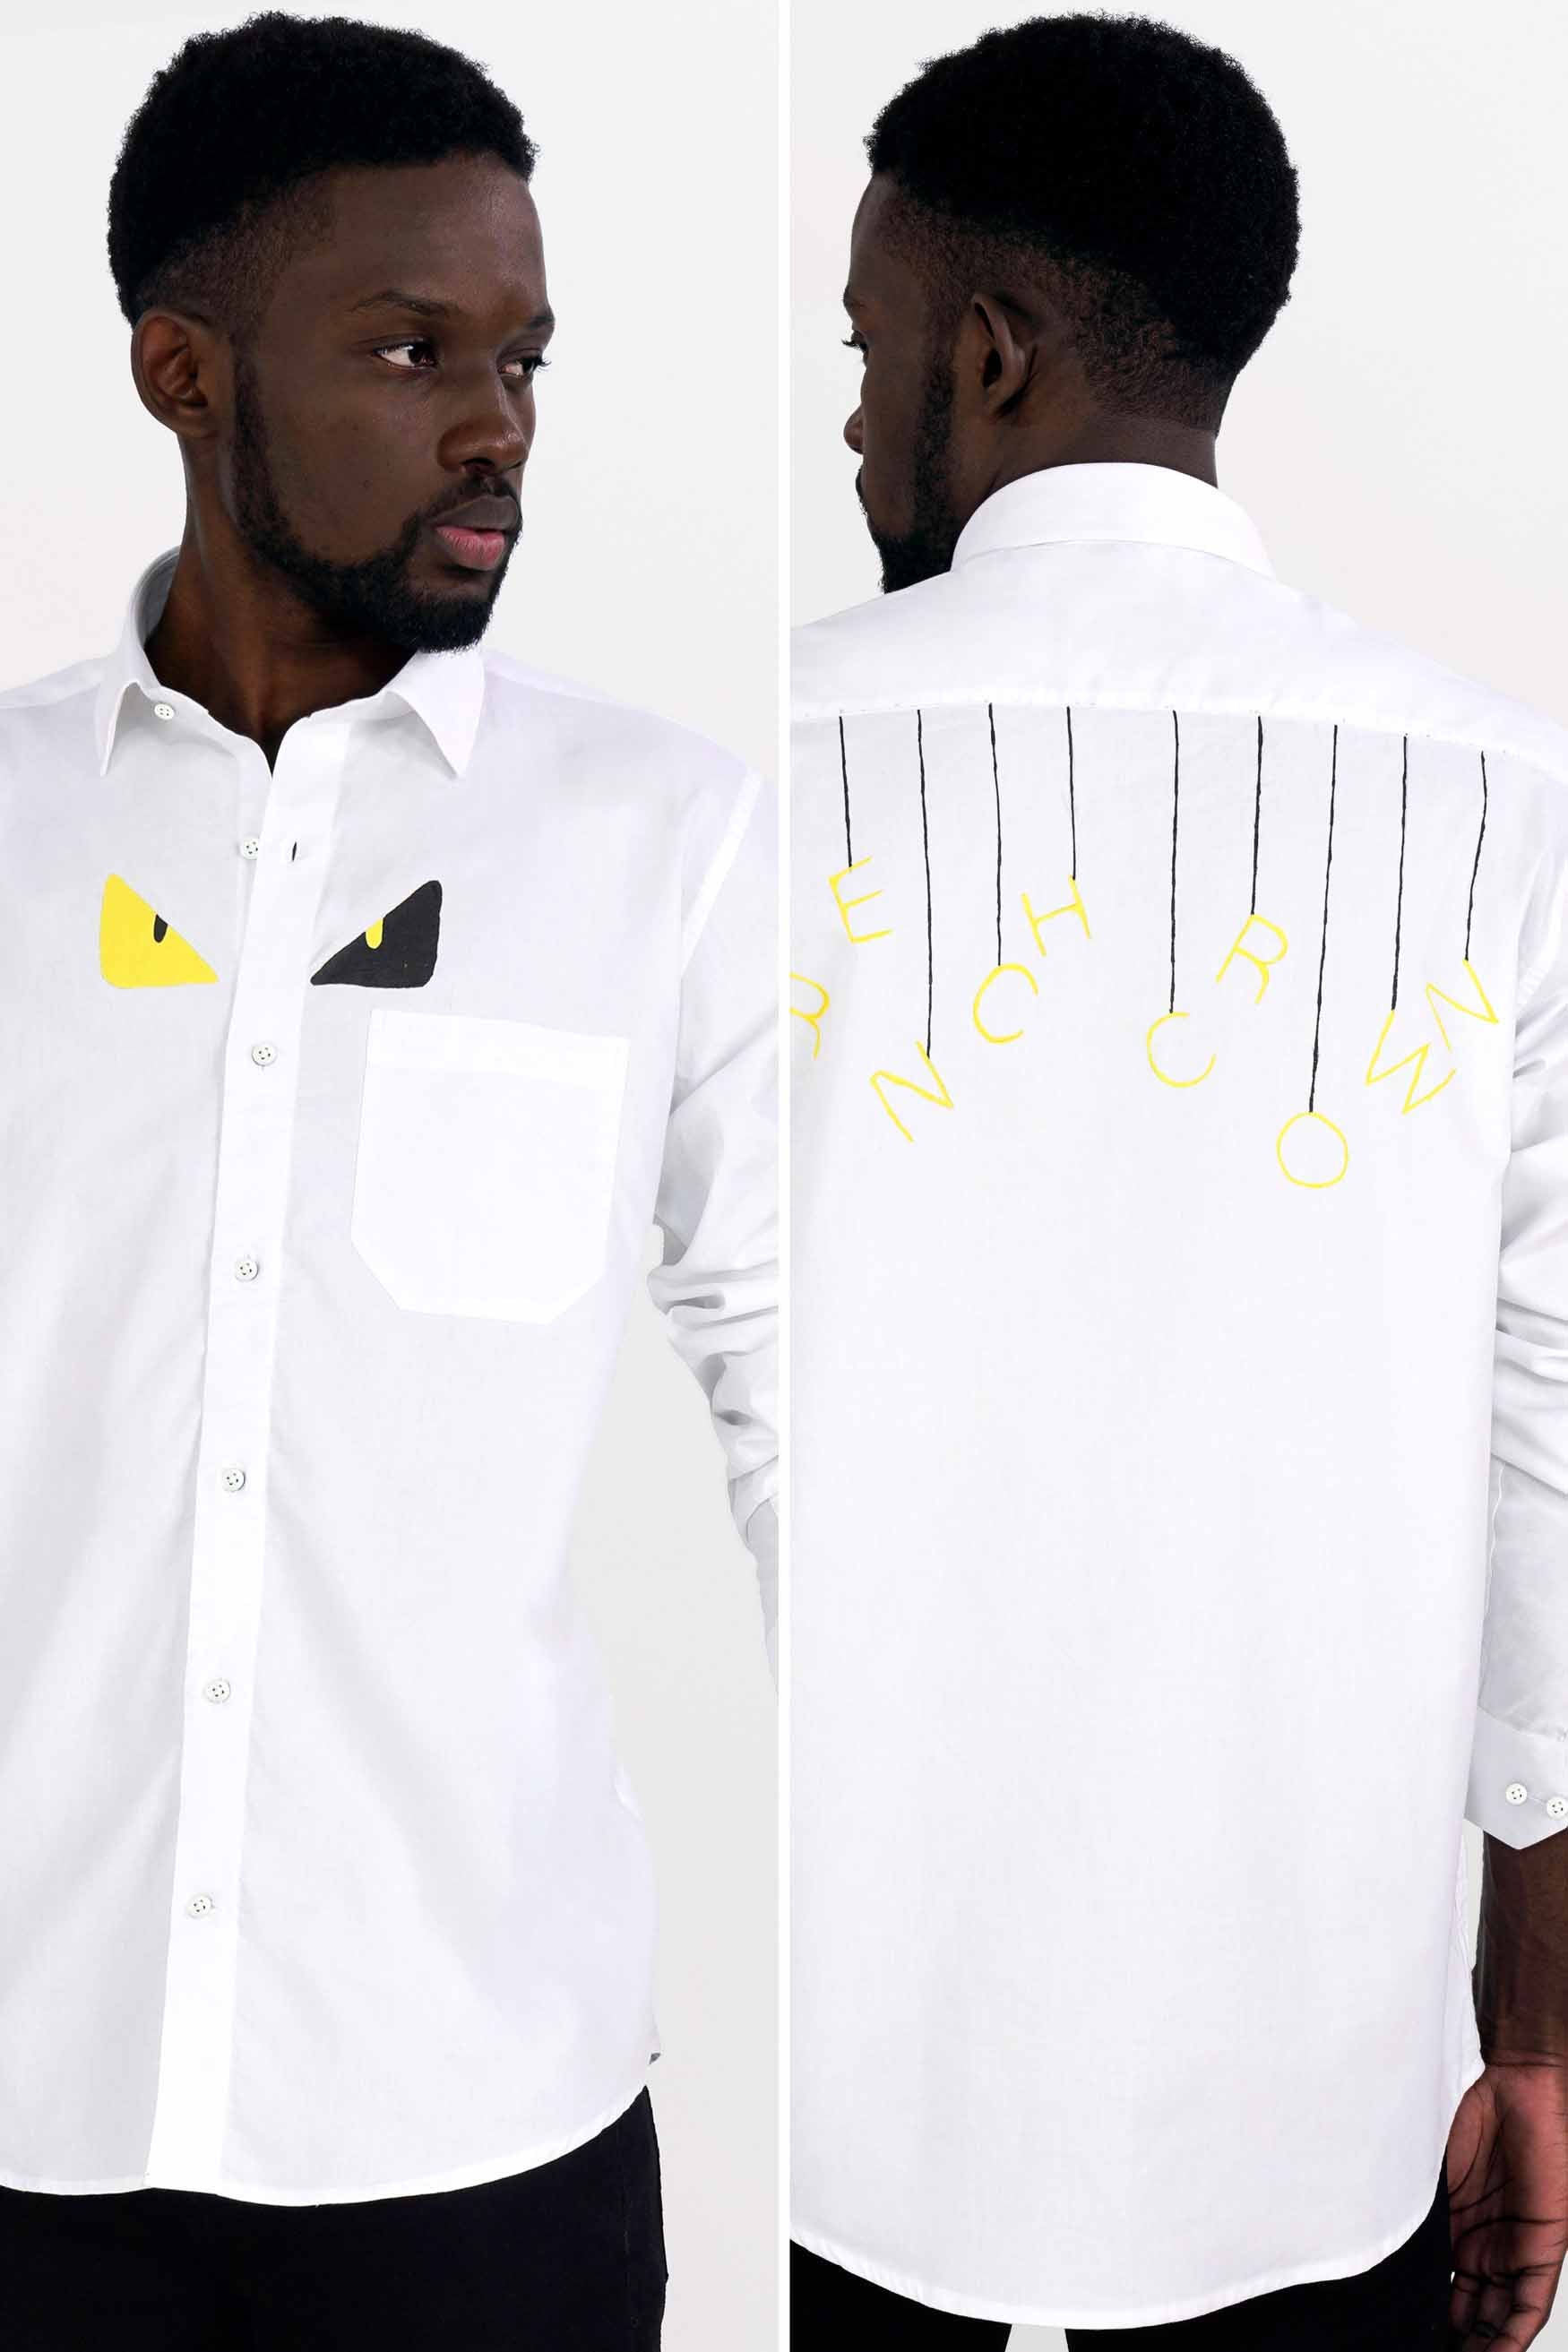 Bright White with Canary Yellow and Black Hand Painted Luxurious Linen Designer Shirt 928-ART-38, 928-ART-H-38, 928-ART-39, 928-ART-H-39, 928-ART-40, 928-ART-H-40, 928-ART-42, 928-ART-H-42, 928-ART-44, 928-ART-H-44, 928-ART-46, 928-ART-H-46, 928-ART-48, 928-ART-H-48, 928-ART-50, 928-ART-H-50, 928-ART-52, 928-ART-H-52